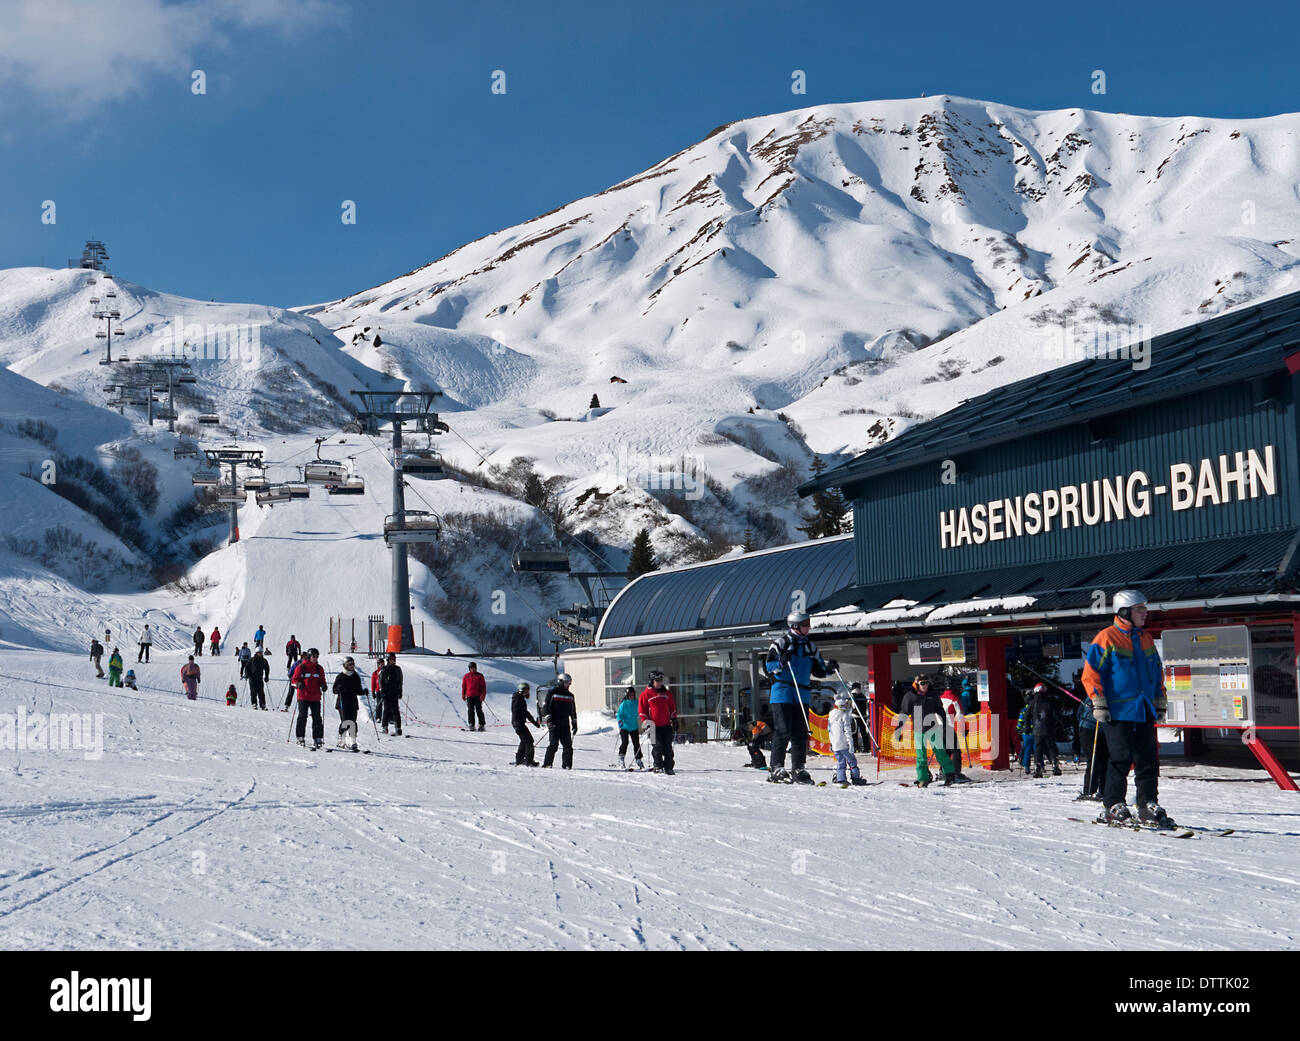 Hasensprung Bahn ski lift and general view of the ski runs above the alpine villages of Oberlech and Lech in Austria Stock Photo